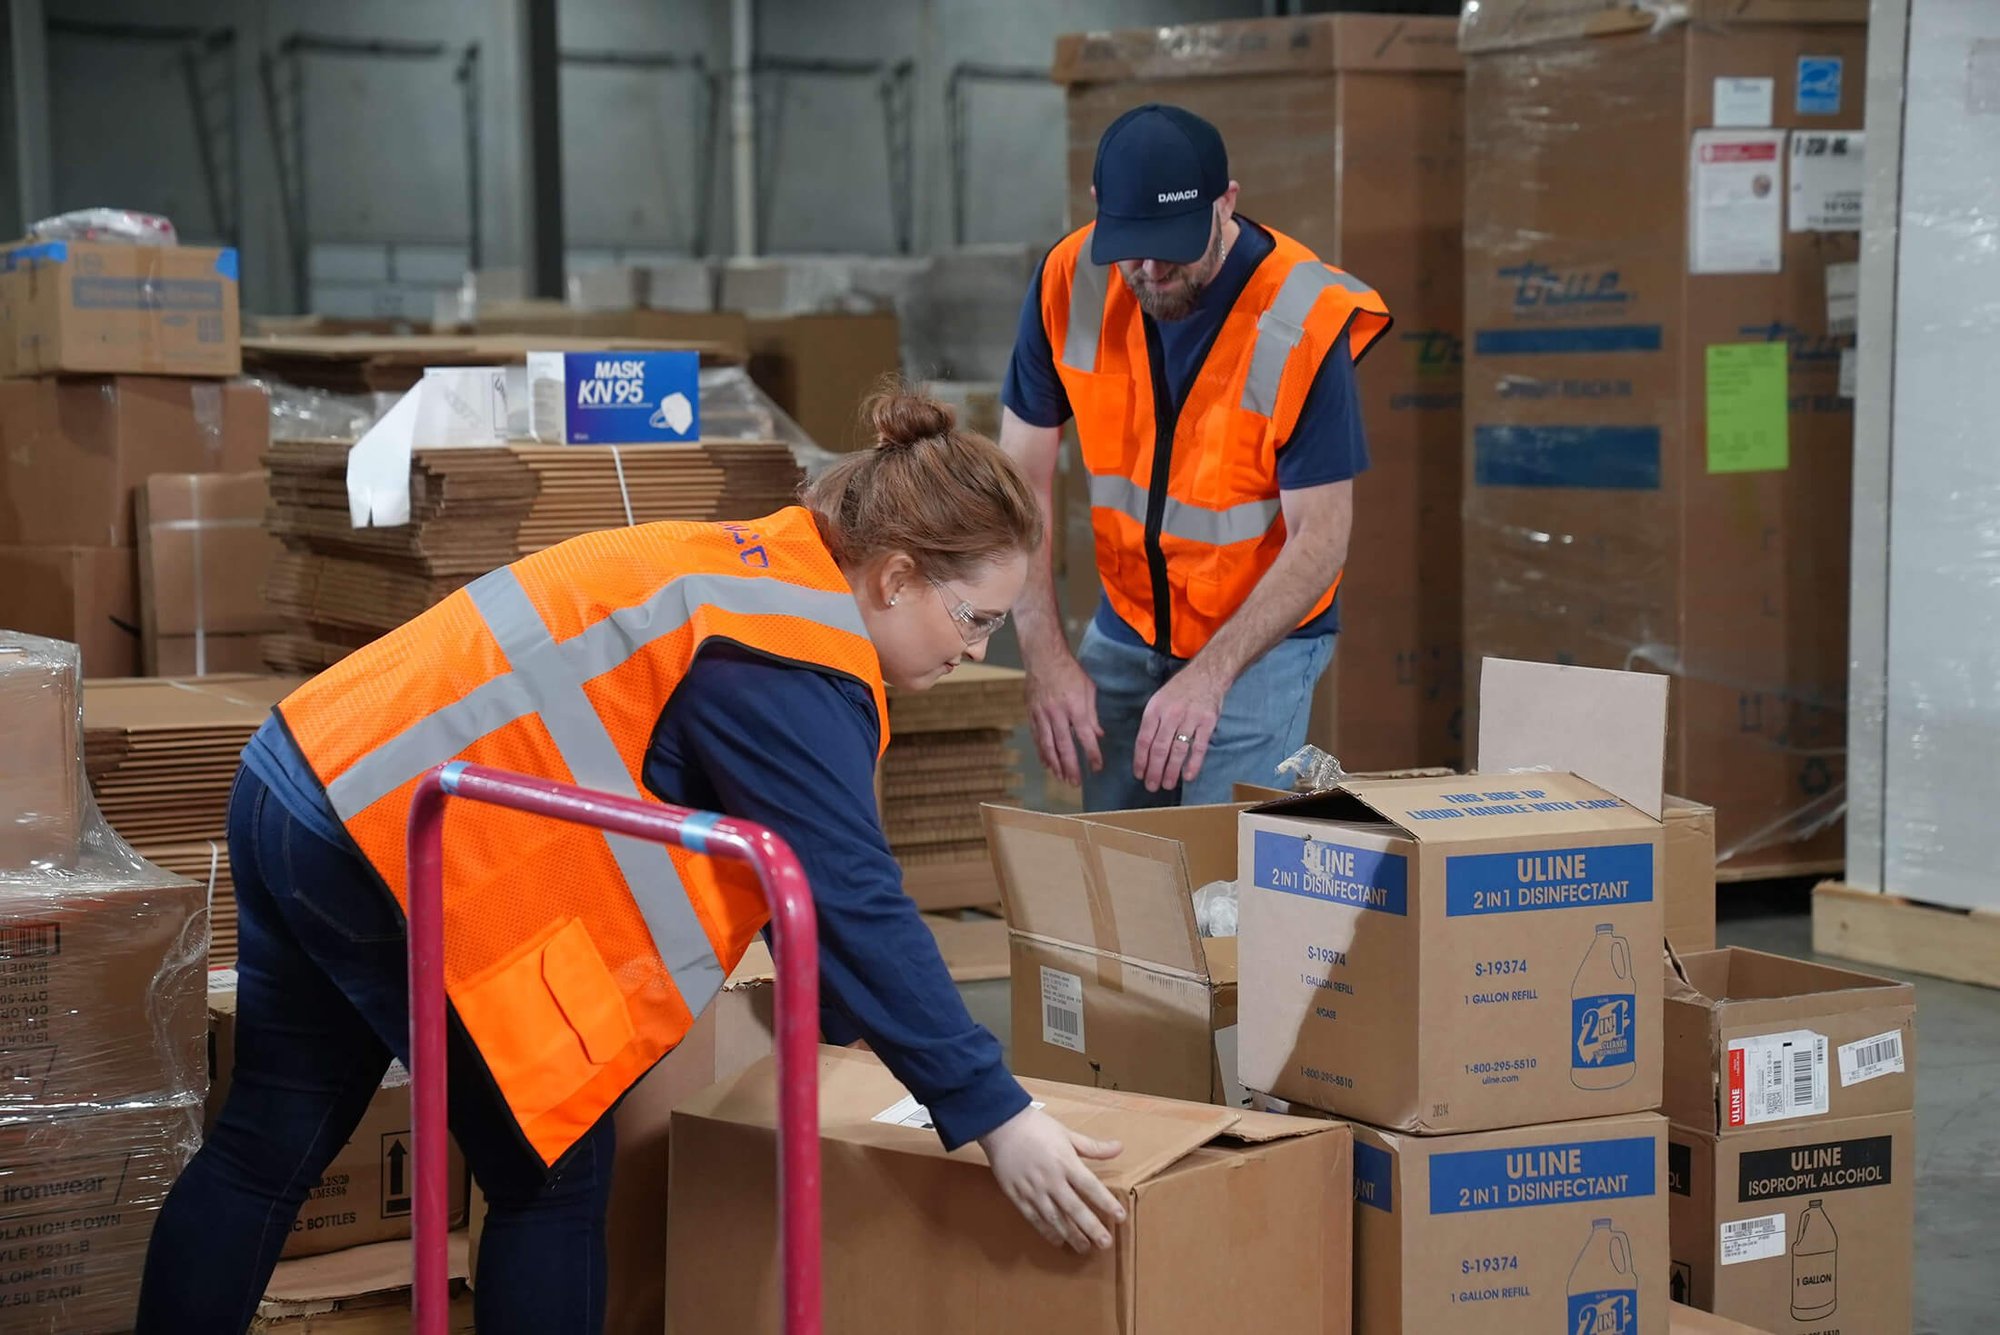 Two DAVACO logistics employees wearing orange safety vests working with boxes in a warehouse, showing logistics service.